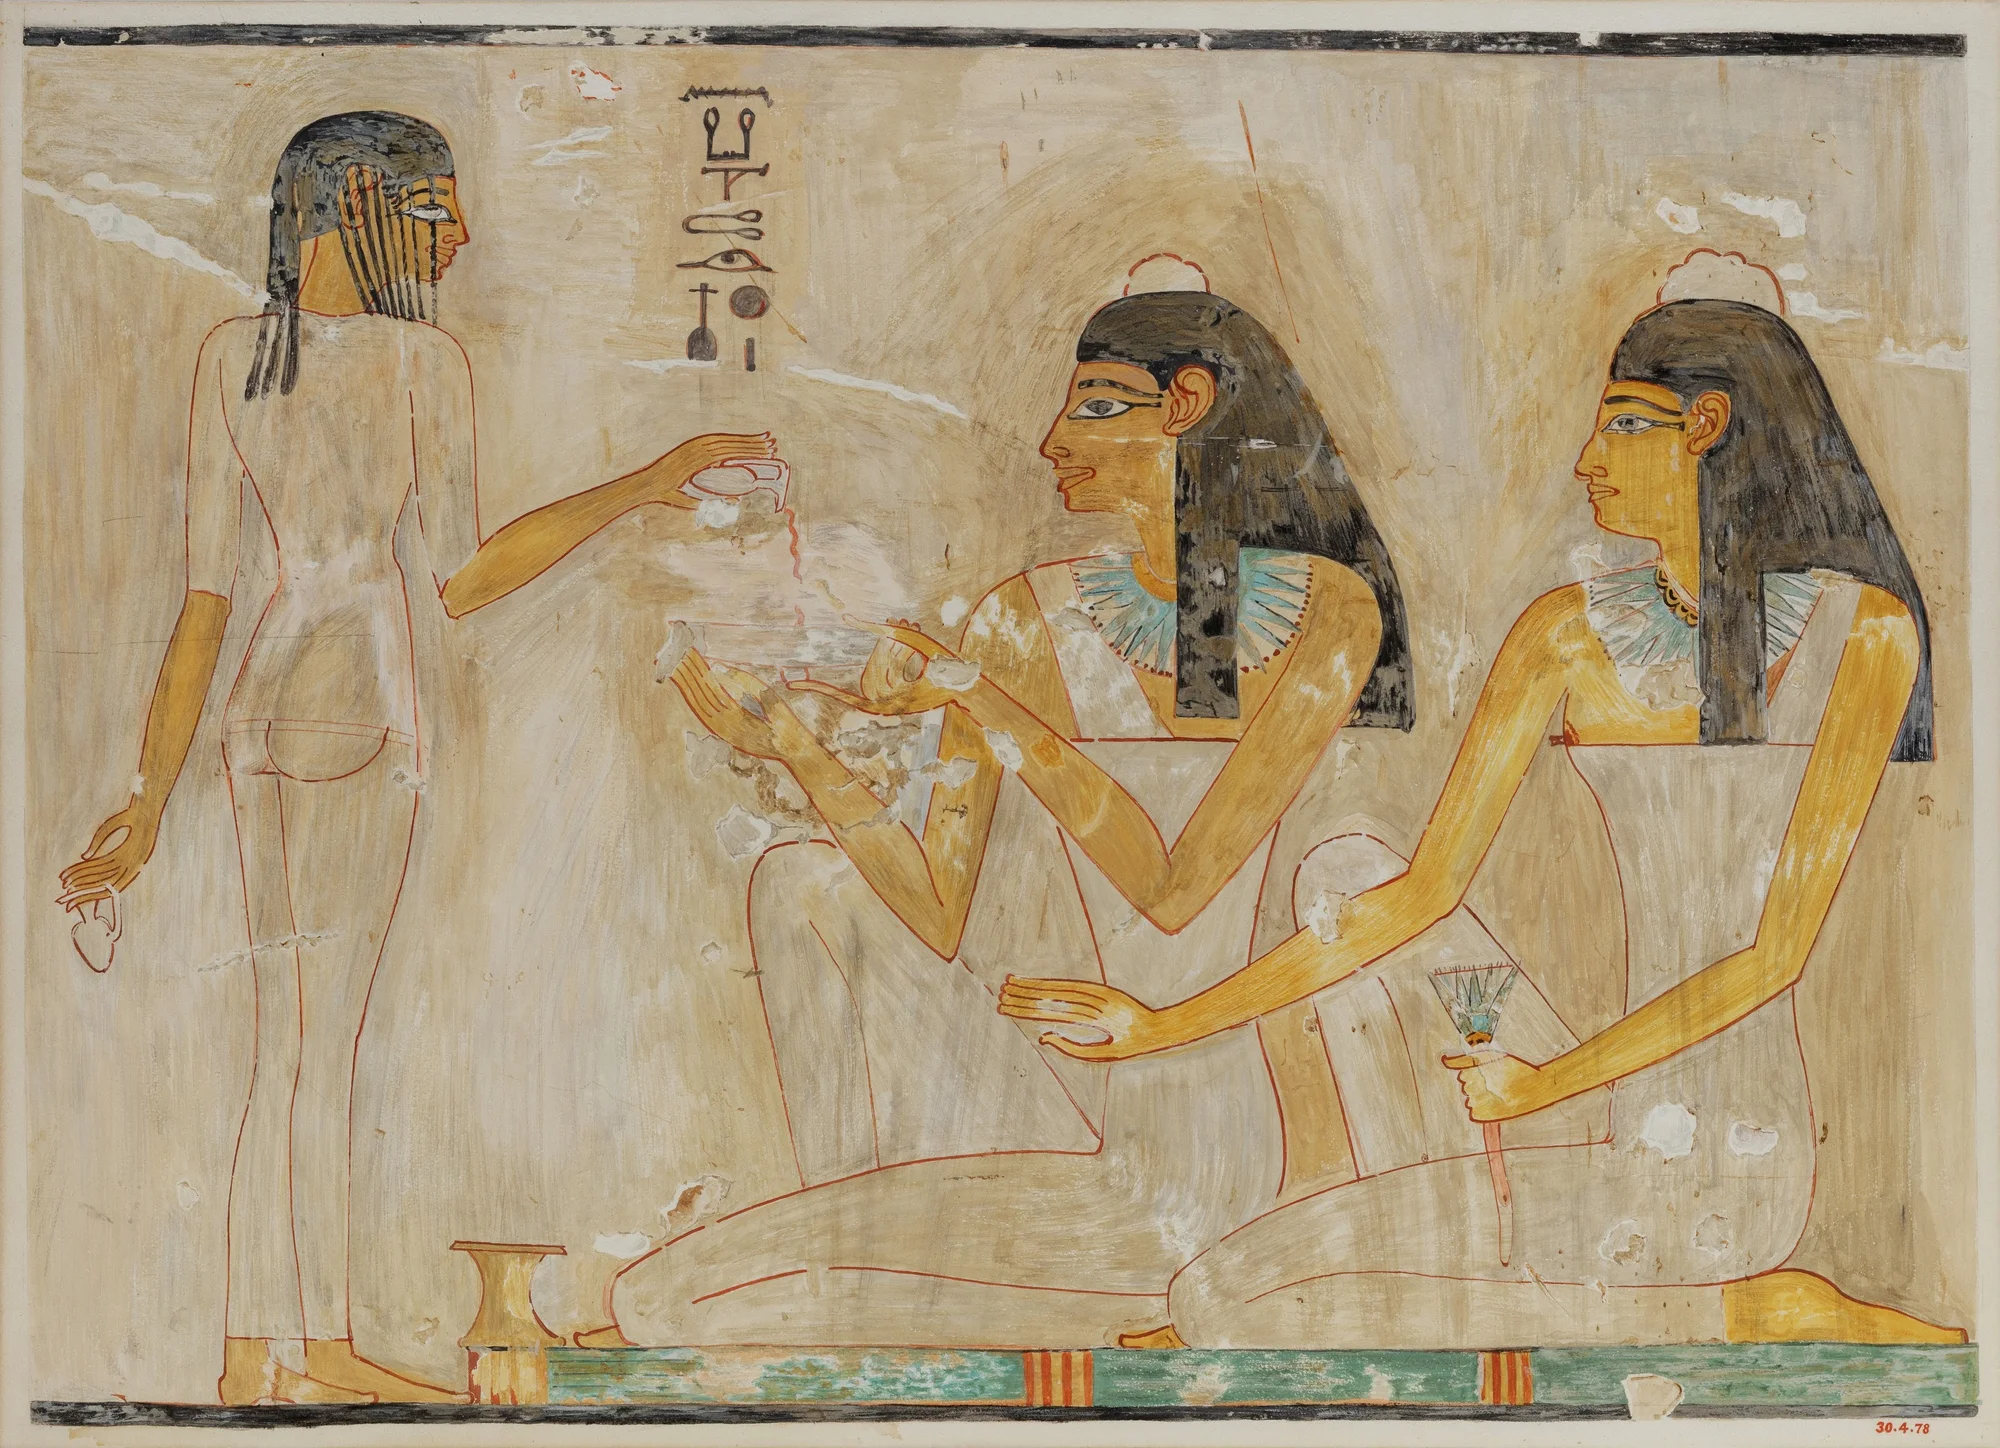 Ancient Egyptian painting depicting a celebratory gathering where individuals converse and share refreshments.